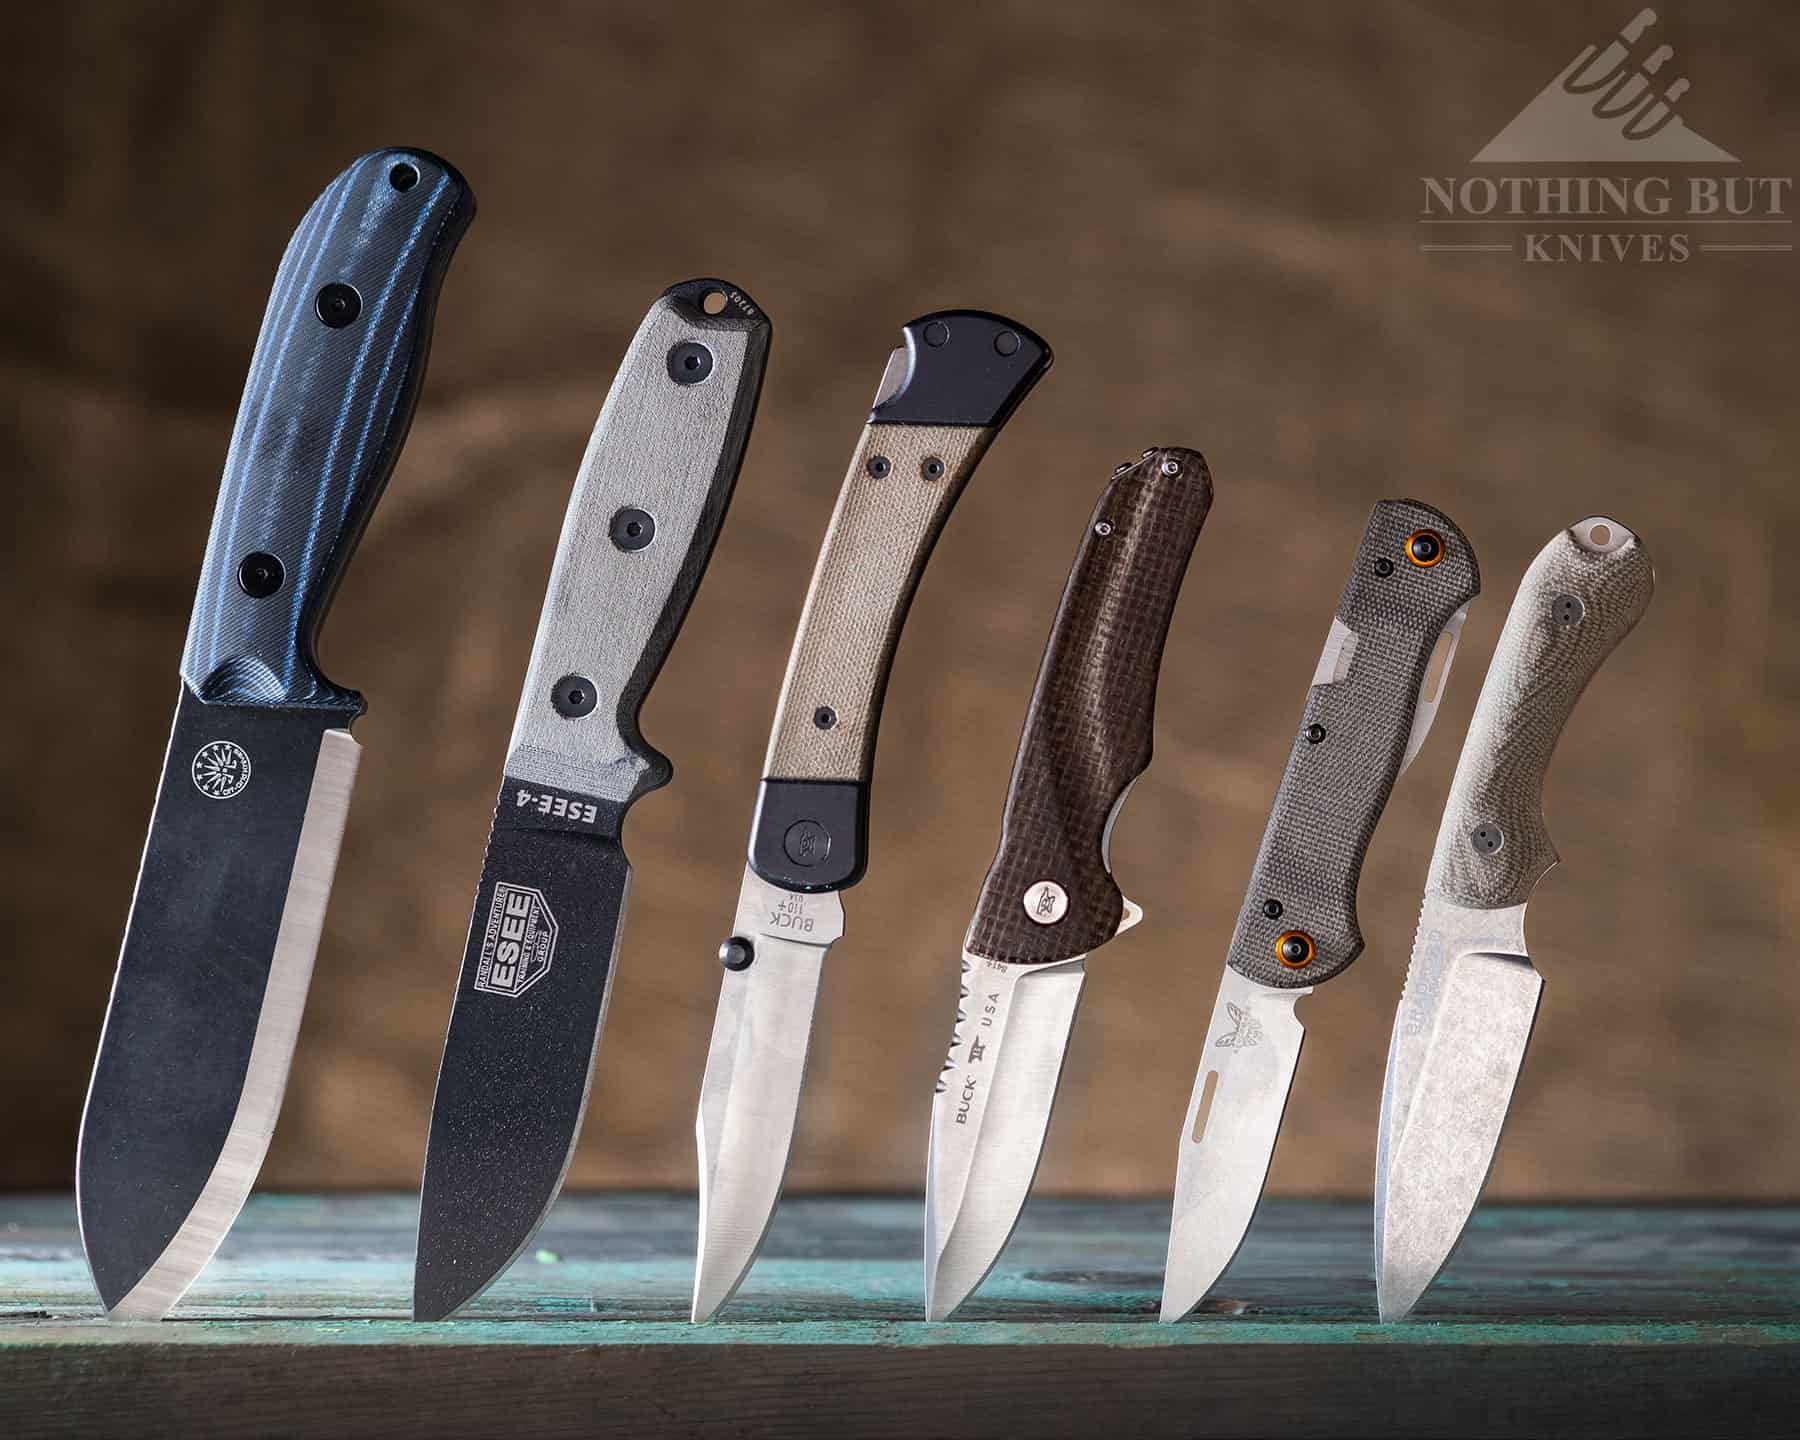 https://www.nothingbutknives.com/wp-content/uploads/2022/08/Great-Knives-With-Micarta-Handle-Scales.jpg